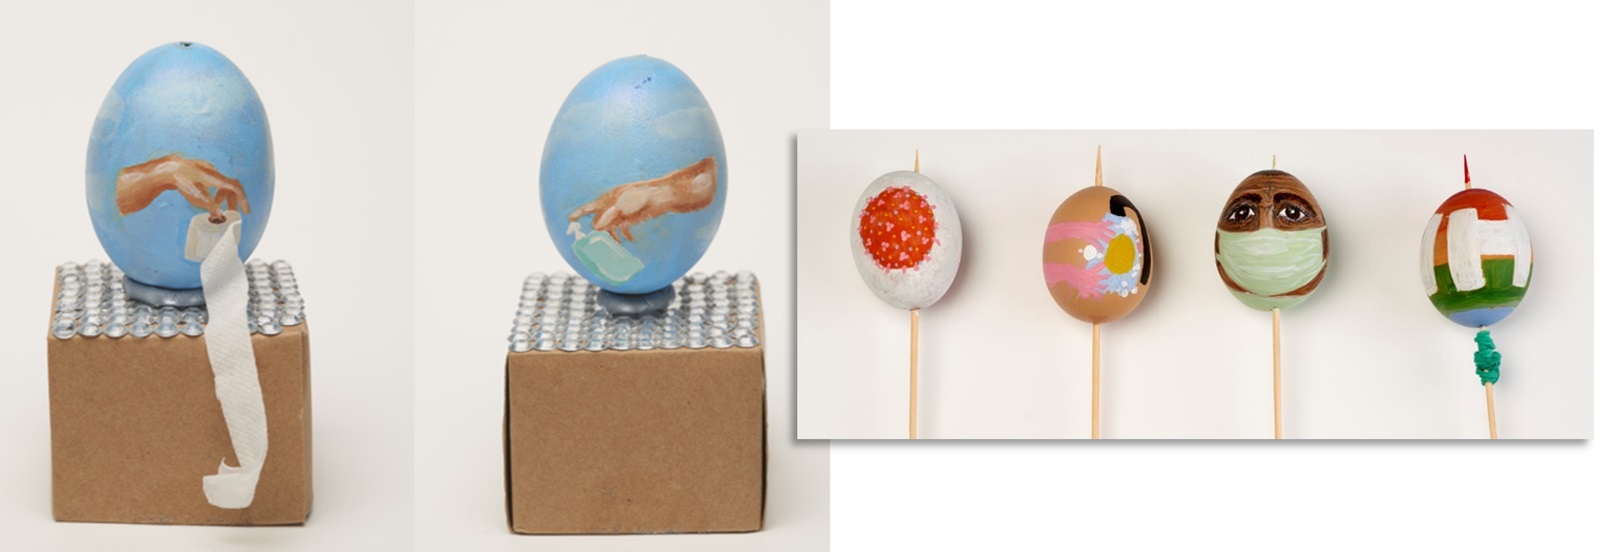 Hand-decorated eggs that were collected as part of the museum’s Collecting Covid project. (ID nos.: 2021.184/1 and 2021.193) 